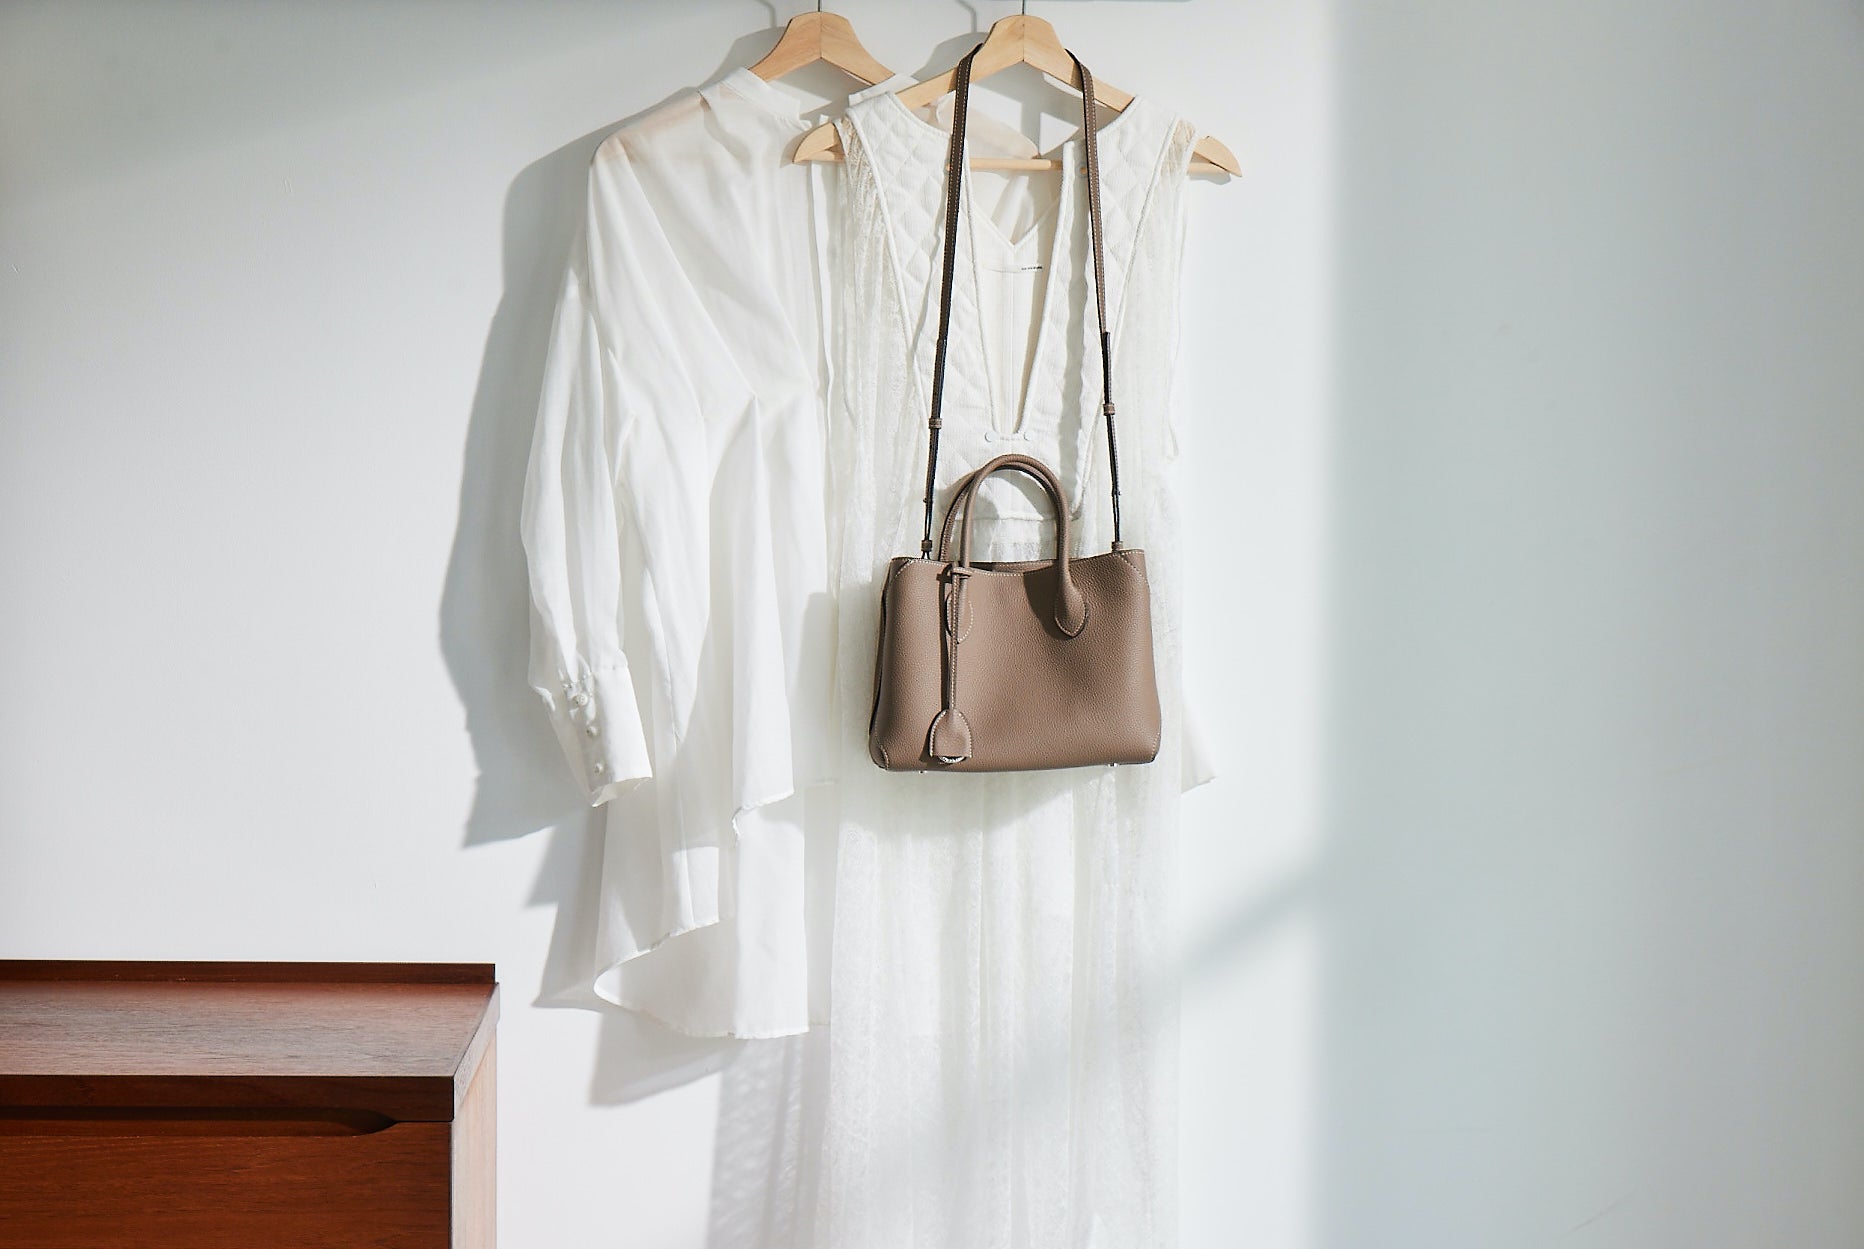 A stylish outfit inspiration with the Mia Tote Bag as a shoulder bag.